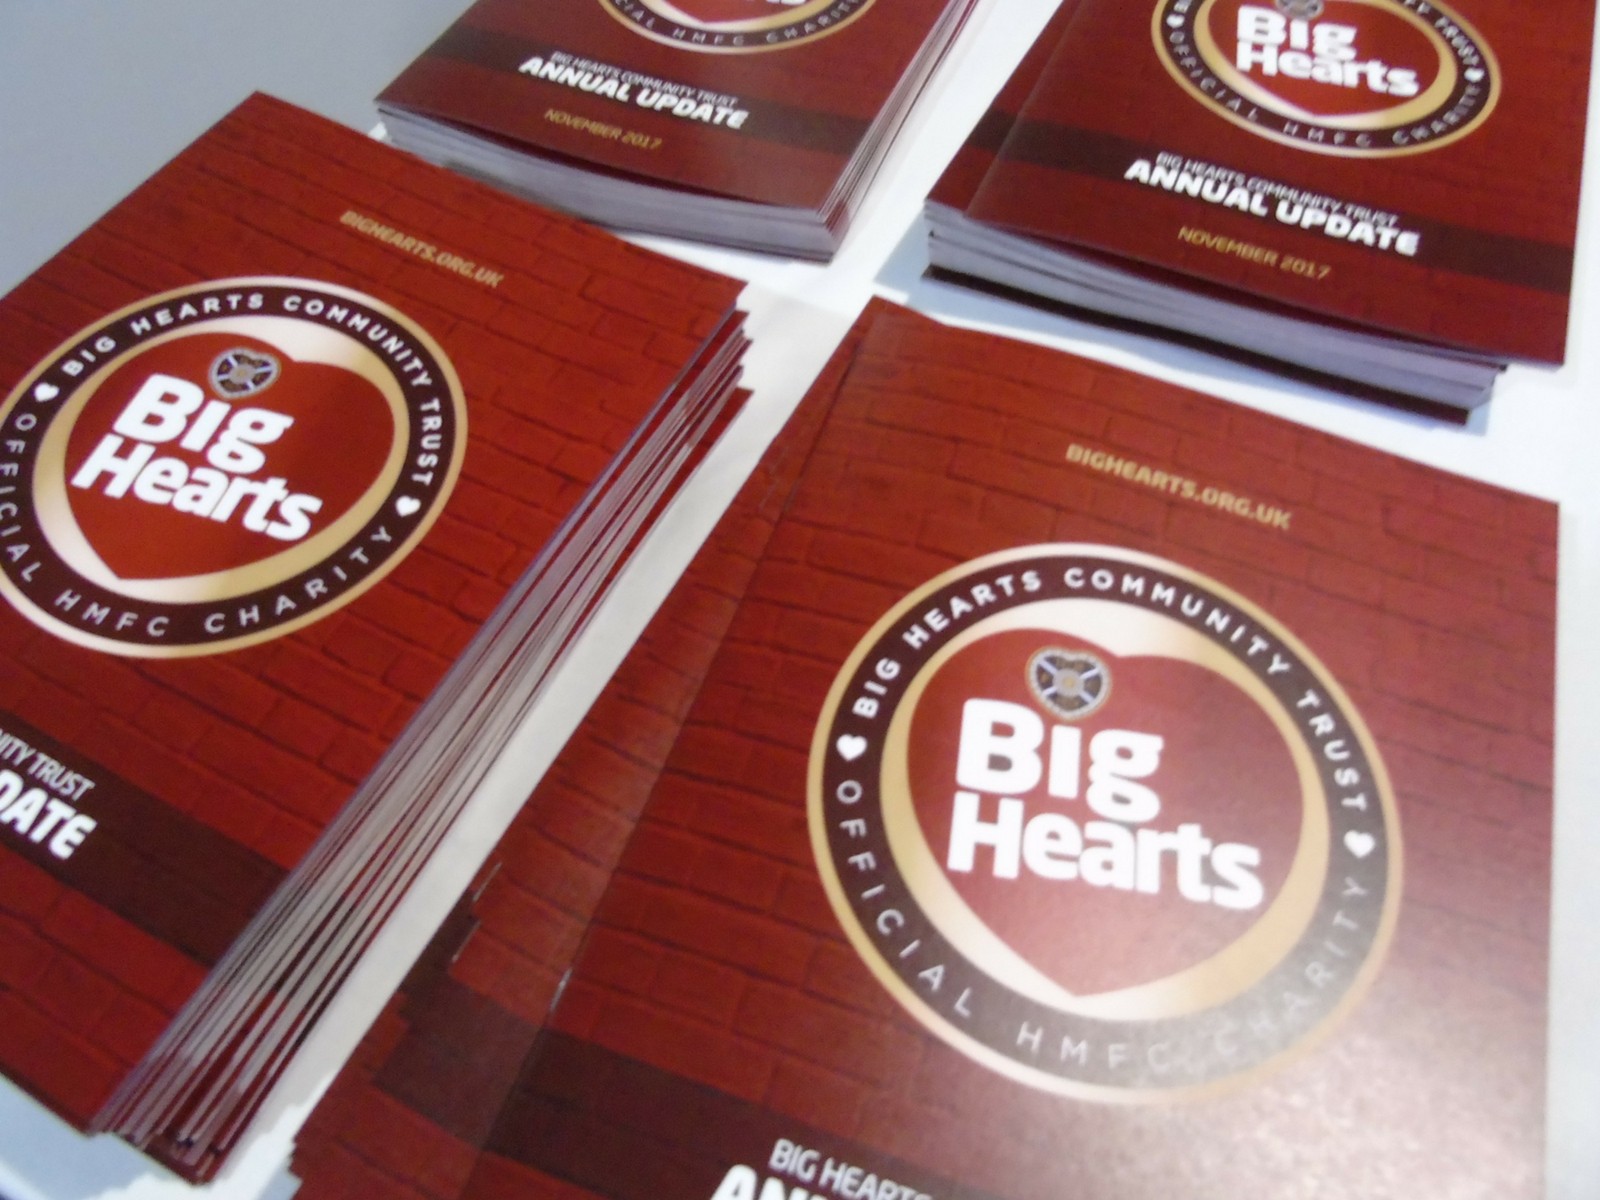  » Big Hearts 2017 Annual Update is out!